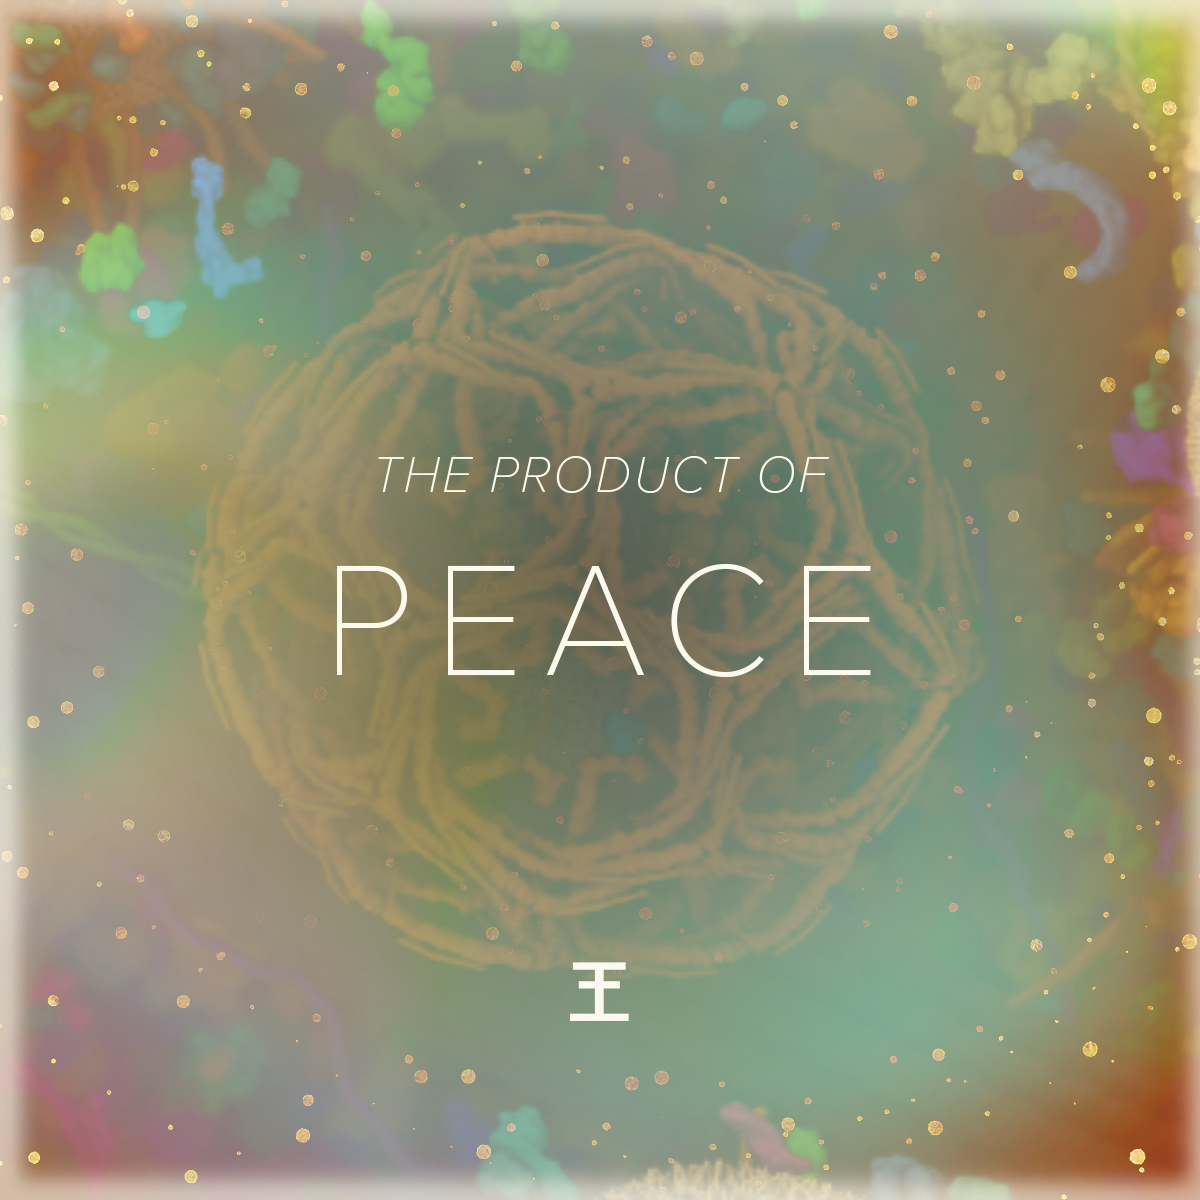 The Product of Peace (Eph 2:11-22)